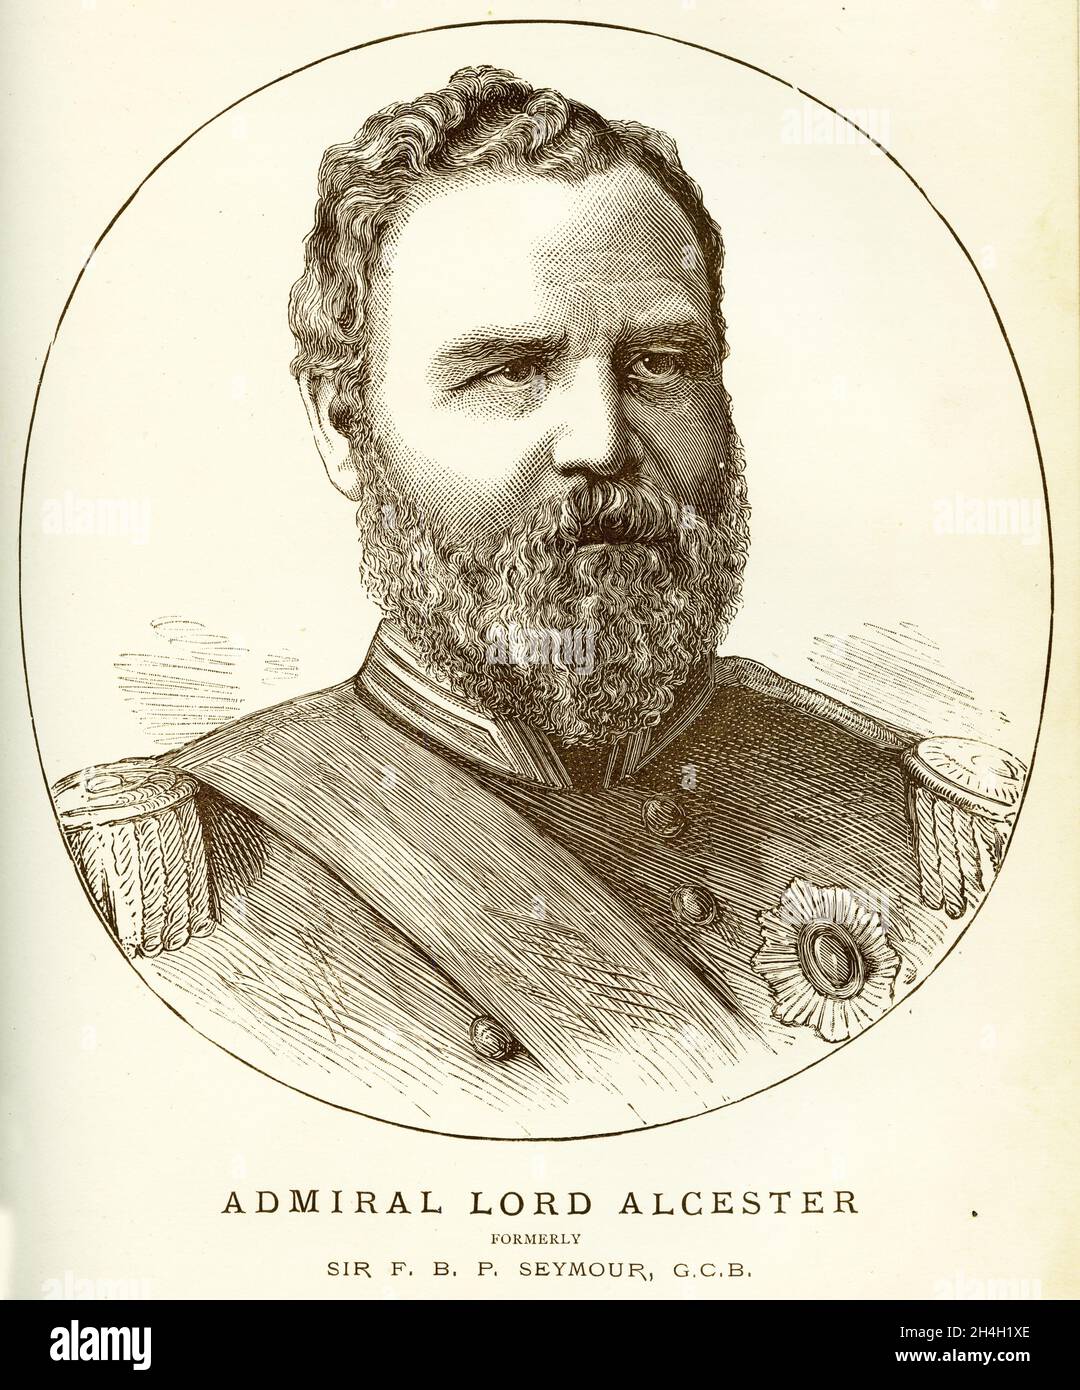 Engraving of Admiral Frederick Beauchamp Paget Seymour, 1st Baron Alcester, GCB (April 1821 – 1895)  British naval commander. He was Commander-in-Chief of the Channel Fleet between 1874 and 1877 and of the Mediterranean Fleet between 1880 and 1883., from a publication circa 1900 Stock Photo